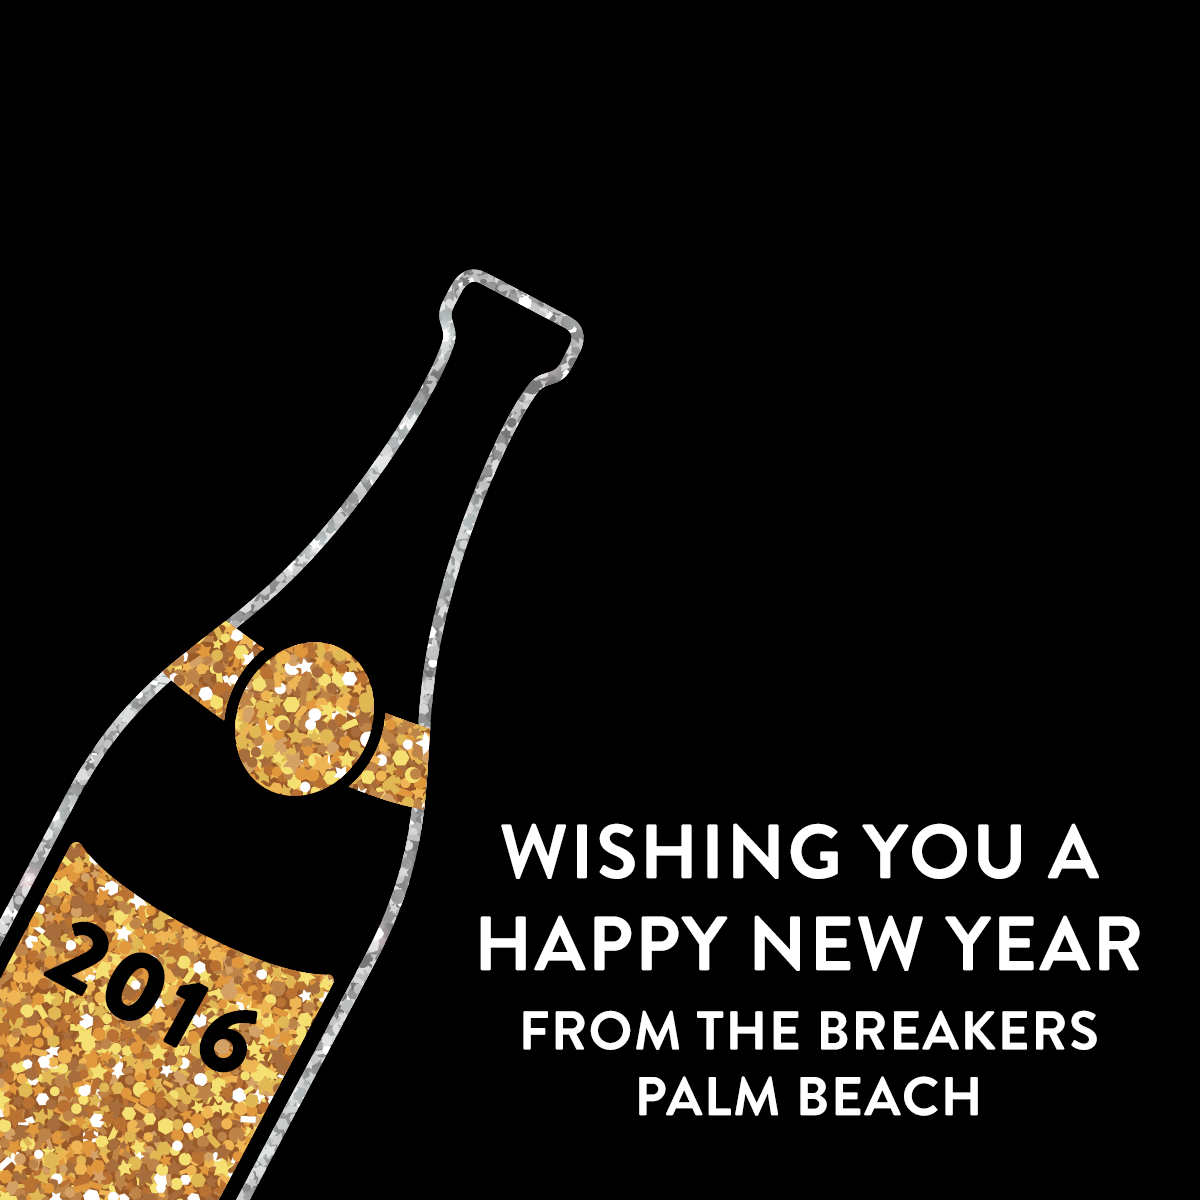 Happy New Year from The Breakers Palm Beach